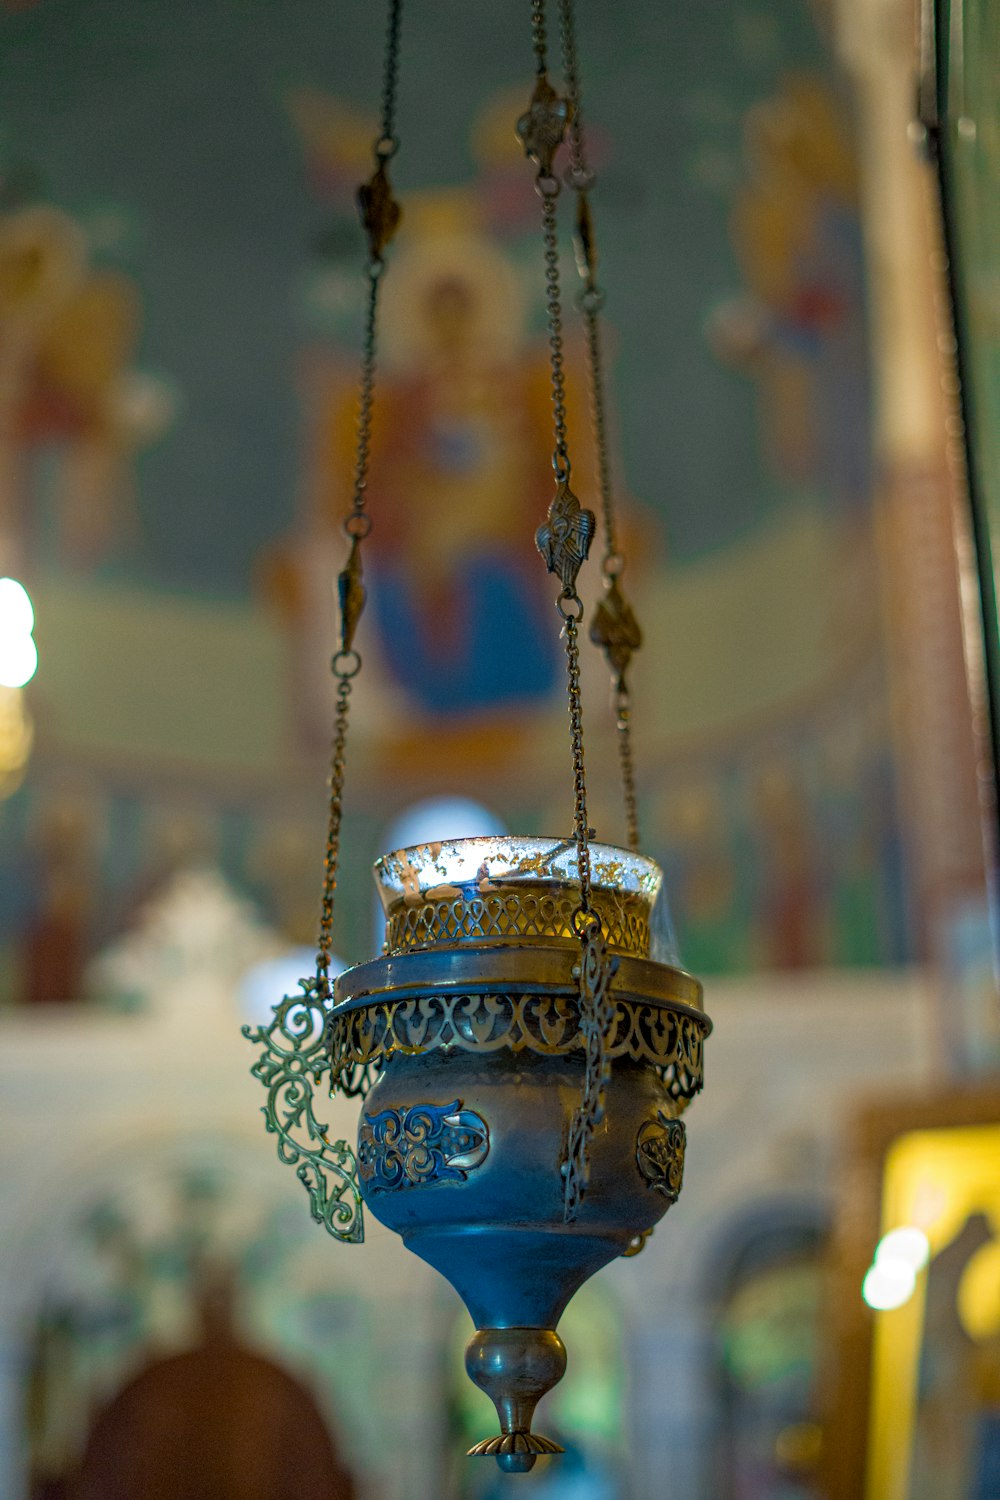 a blue vase hanging from a chain in a church